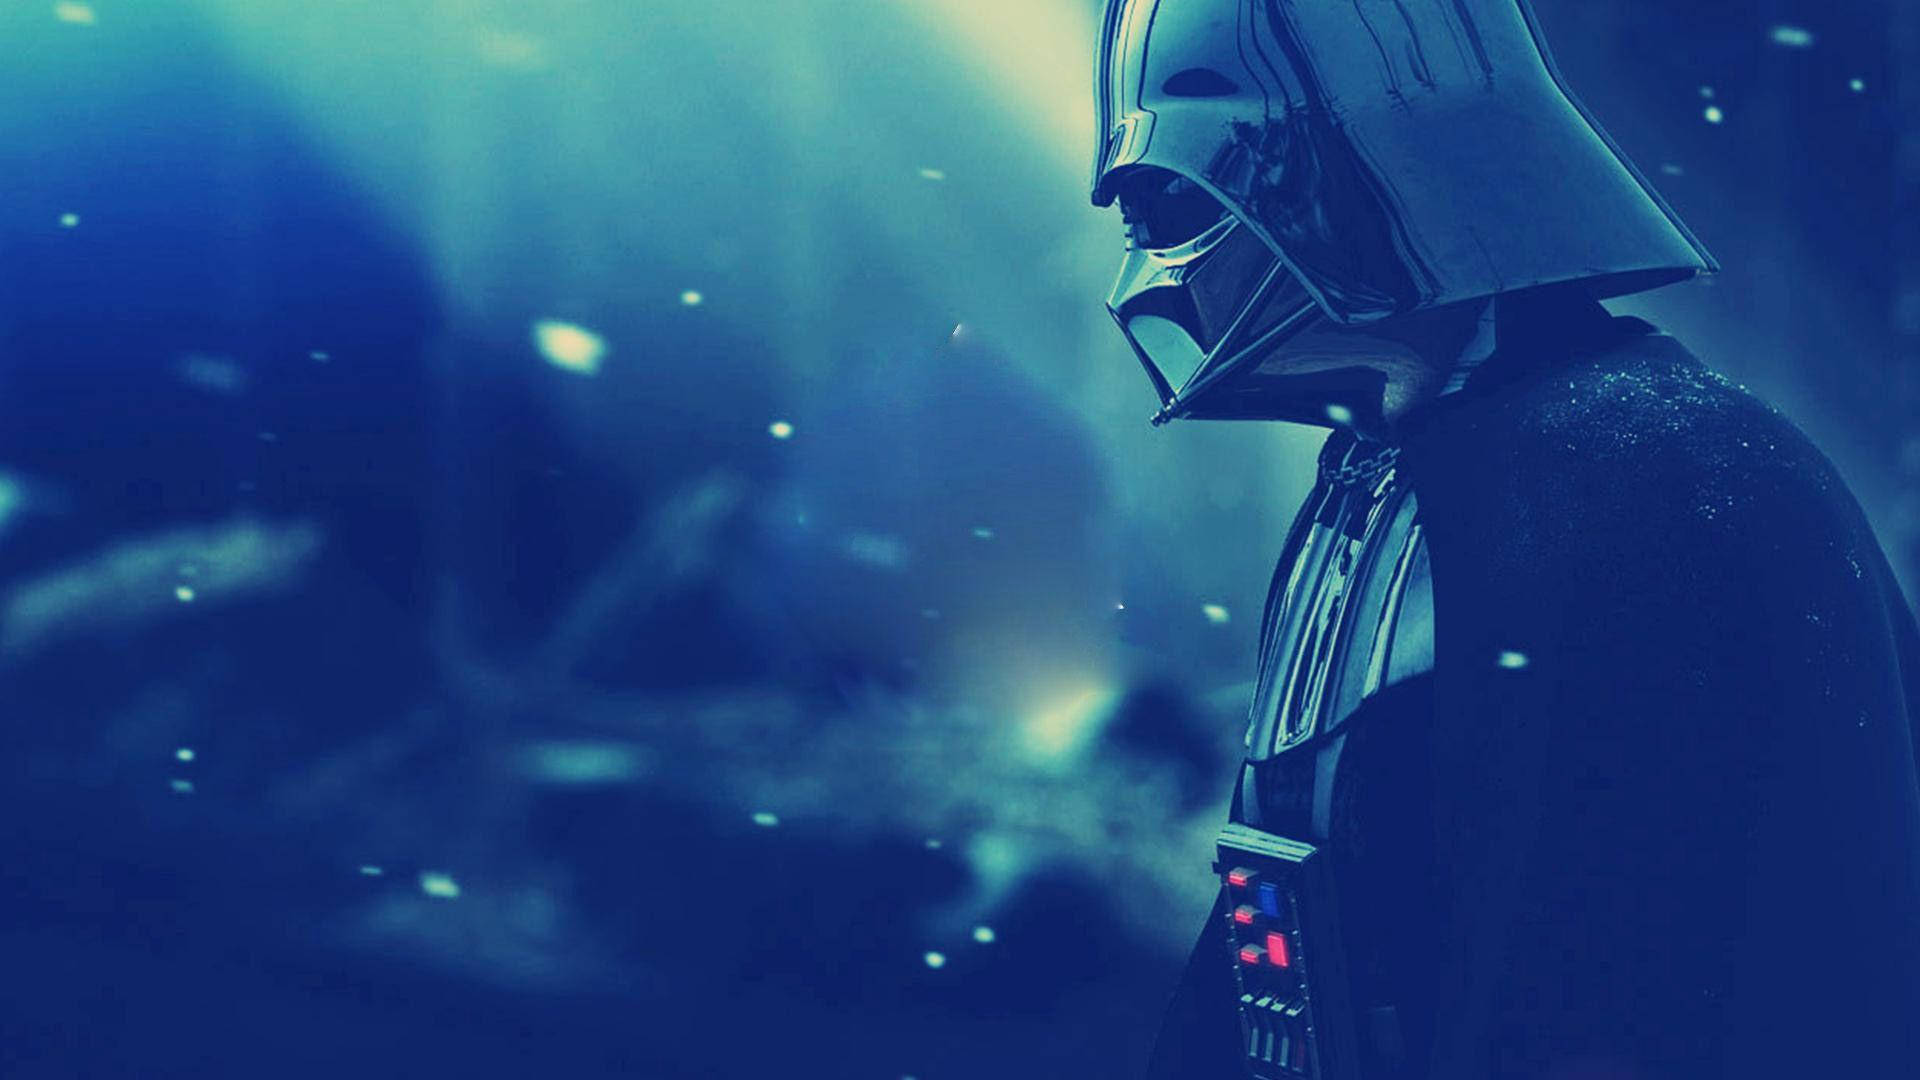 Darth Vader 1920X1080 Wallpaper and Background Image